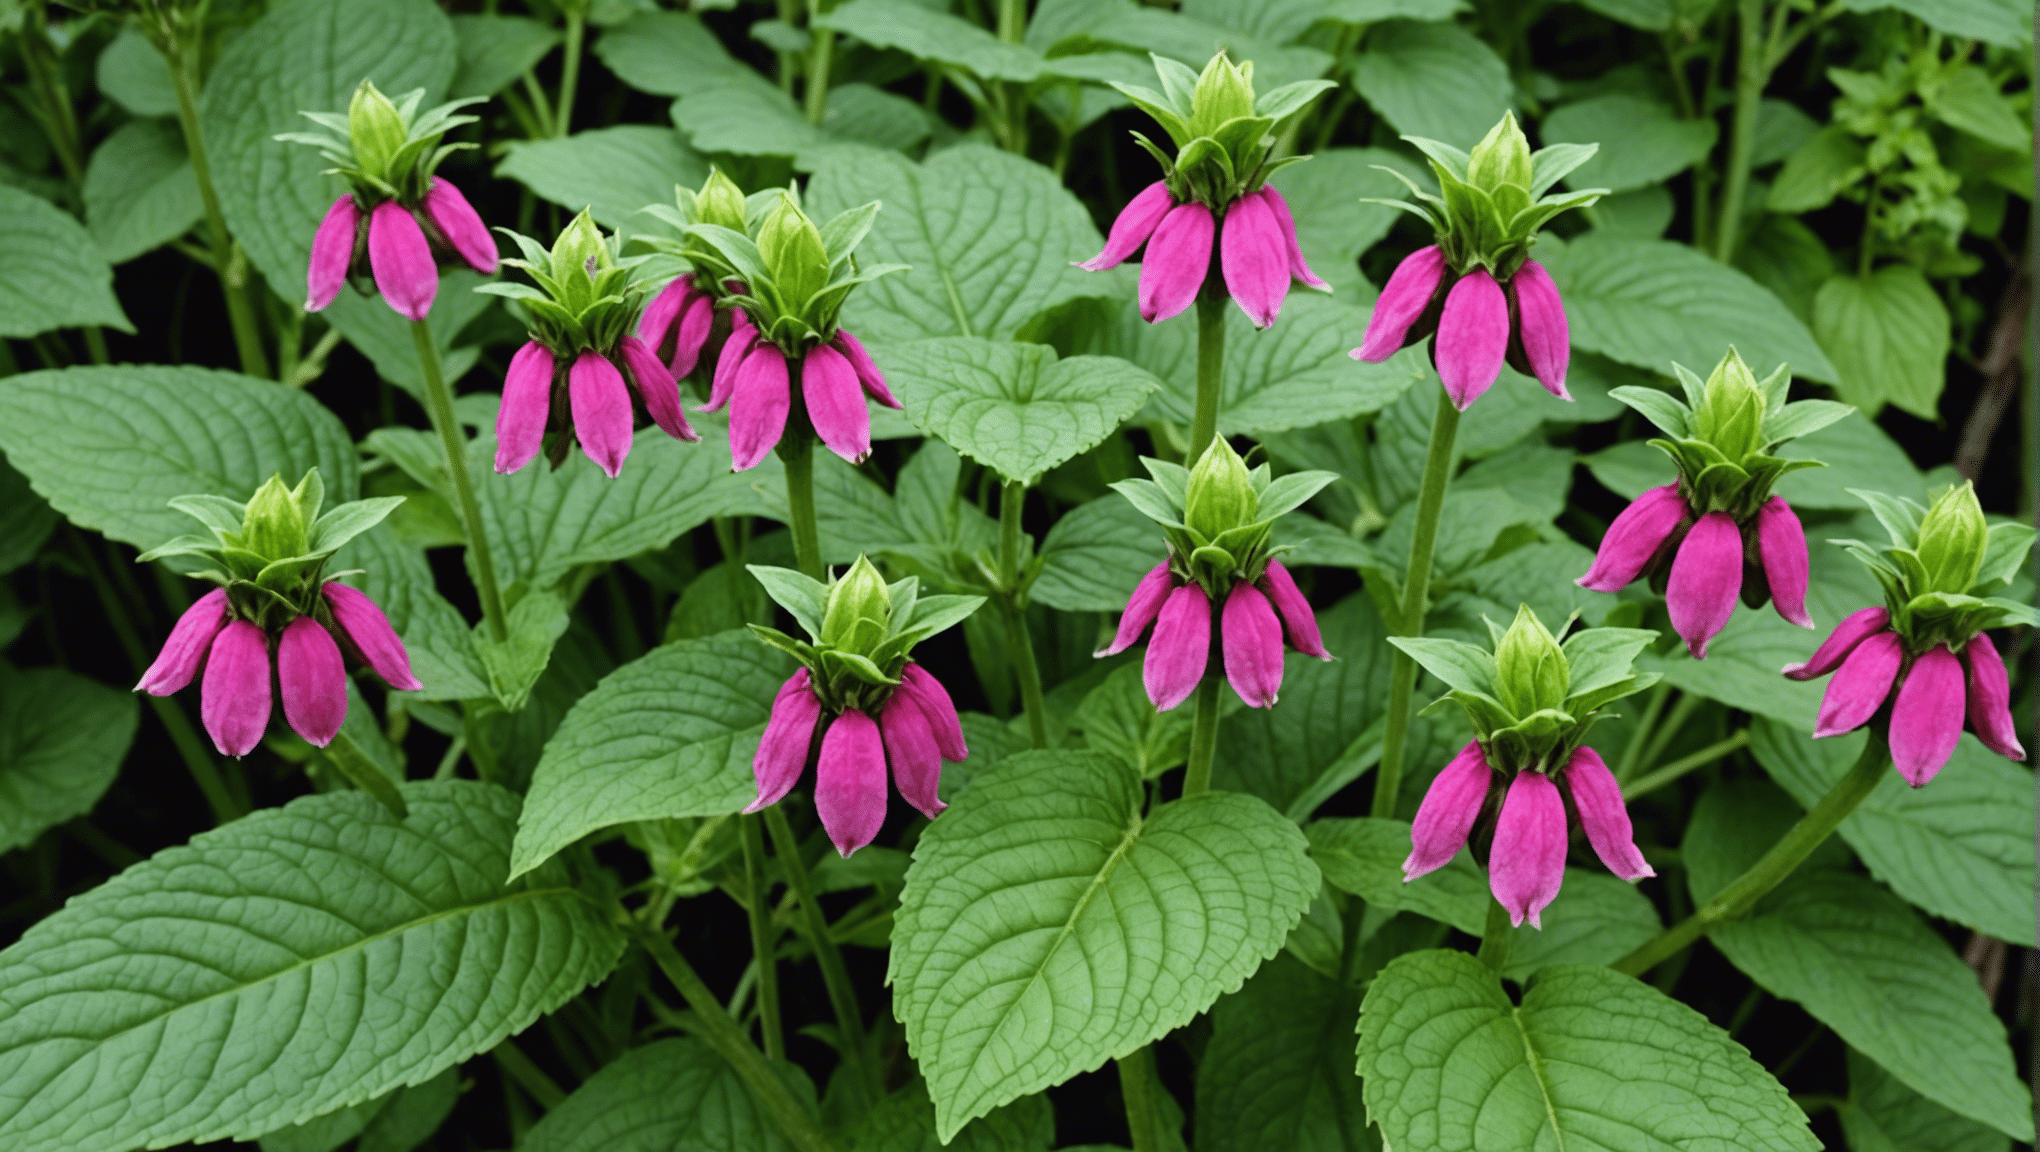 discover the benefits of planting comfrey seeds and how it can improve your gardening experience. learn more about why comfrey is a great addition to your garden.